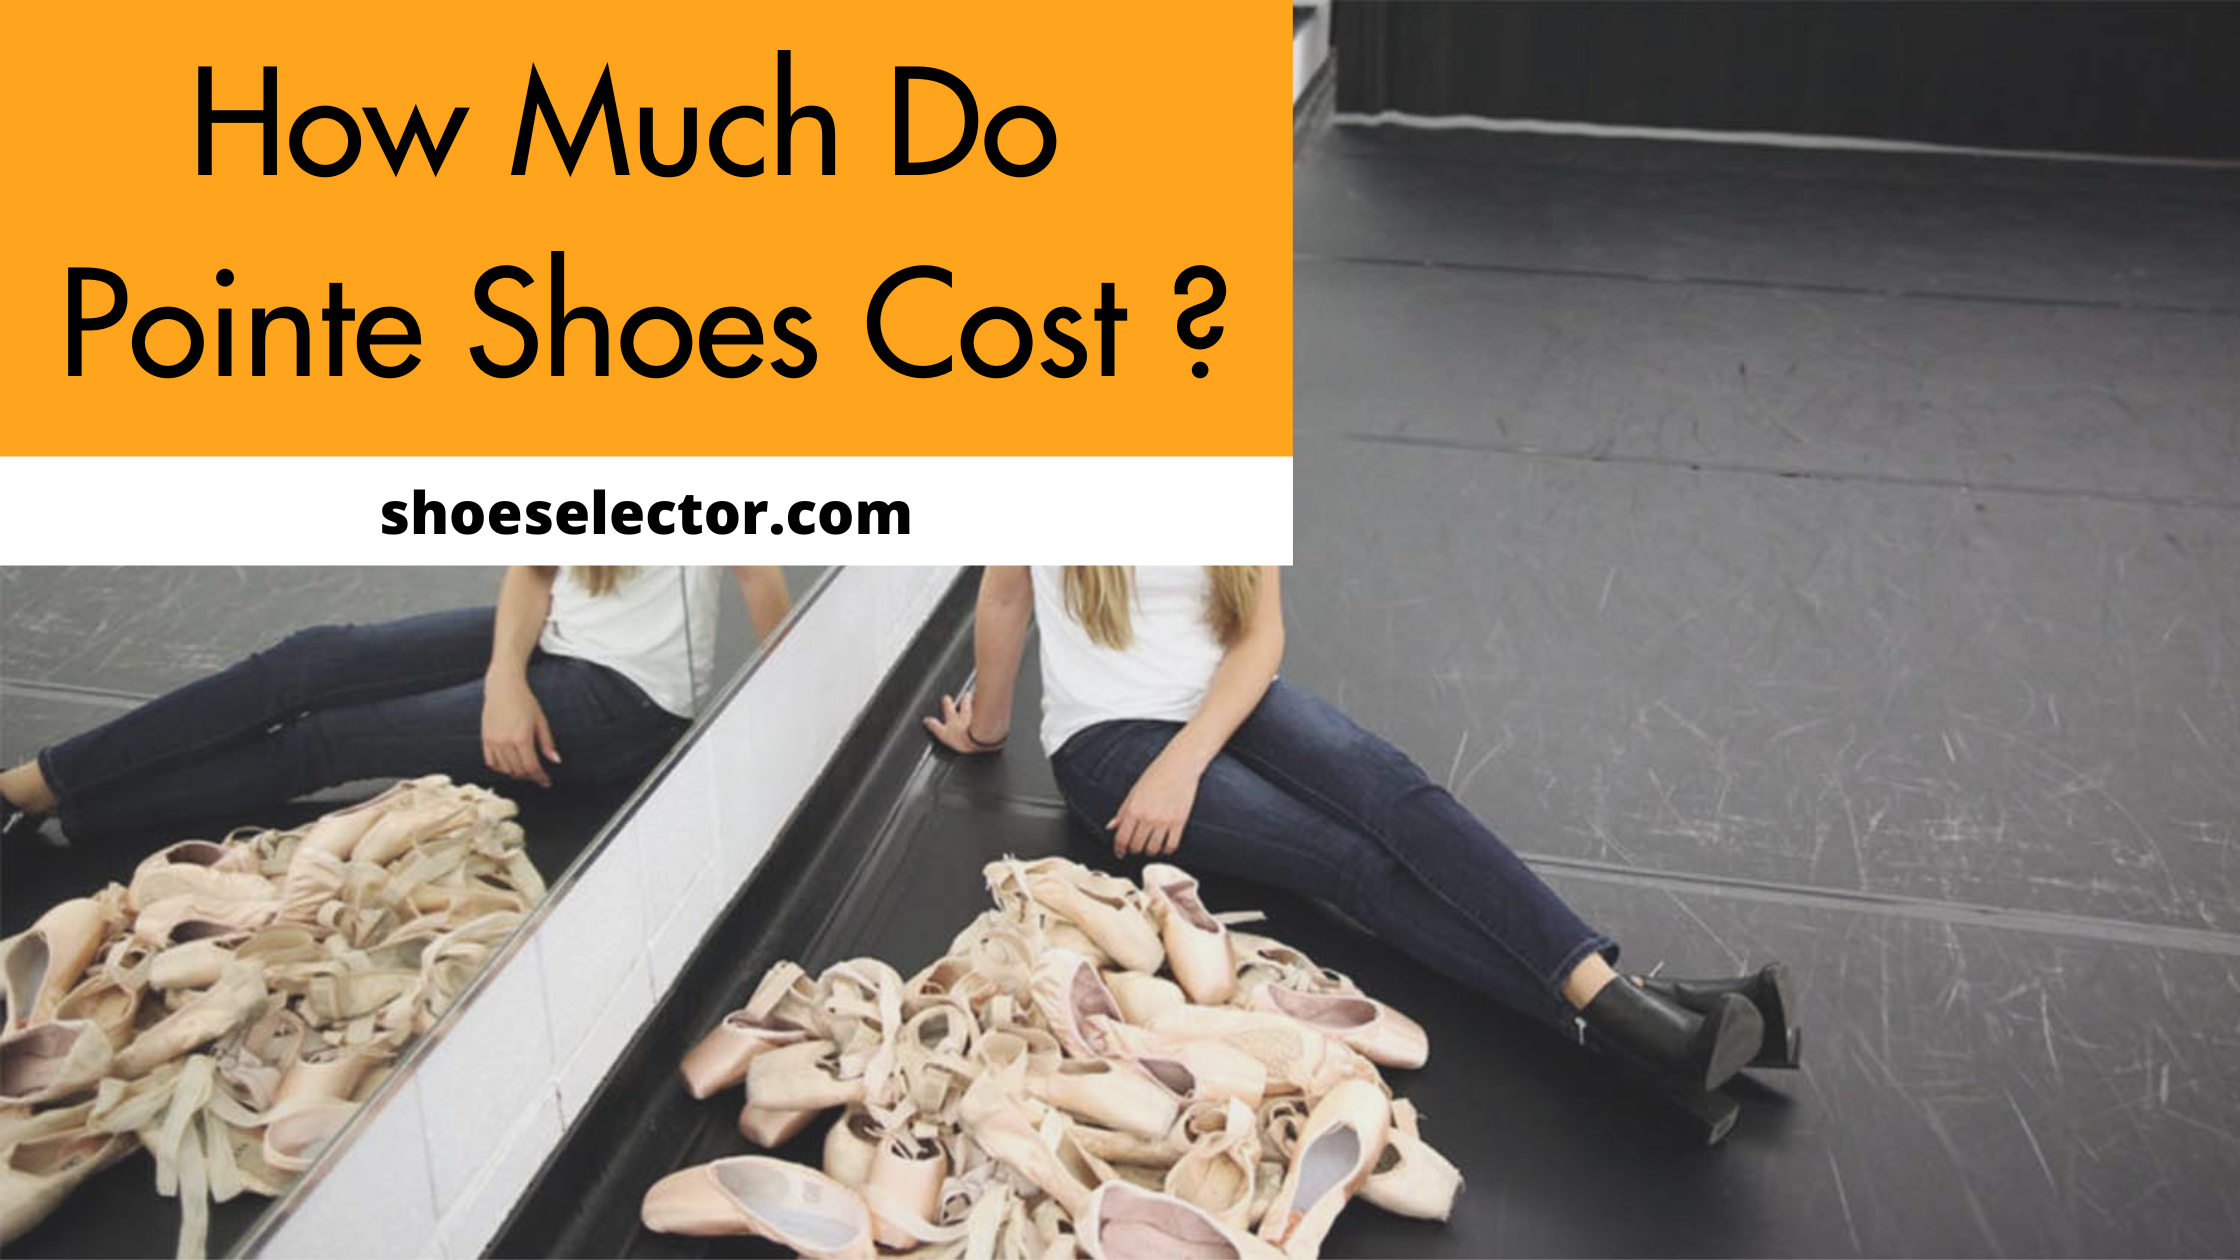 How Much Do Pointe Shoes Cost? The Definitive Guide